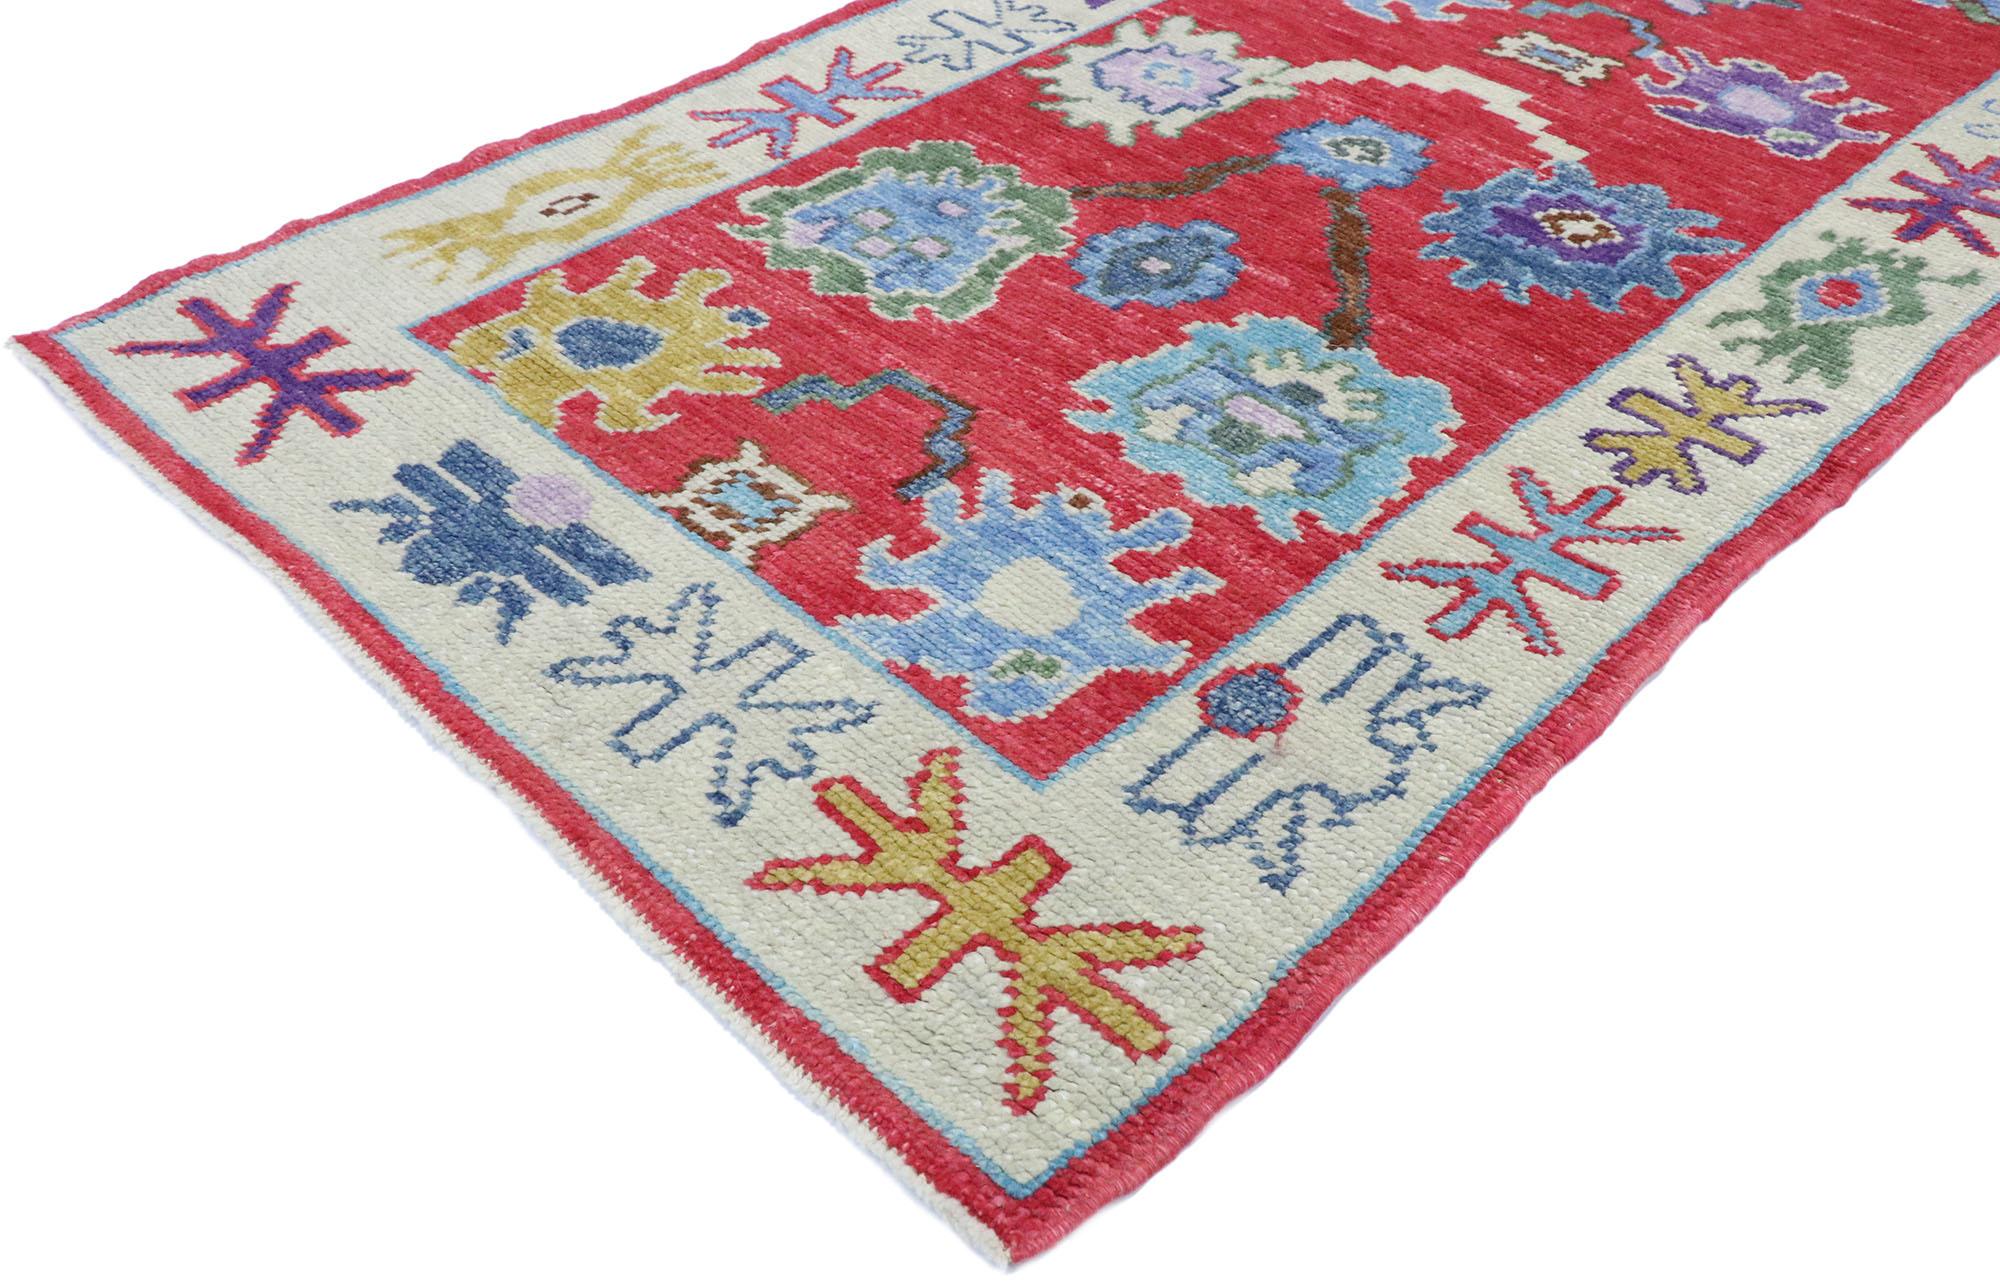 53464, new contemporary Turkish Oushak runner with eclectic modern nautical style. Blending elements from the modern world with a vibrant color palette, this hand knotted wool contemporary Turkish Oushak runner is poised to impress. It features an